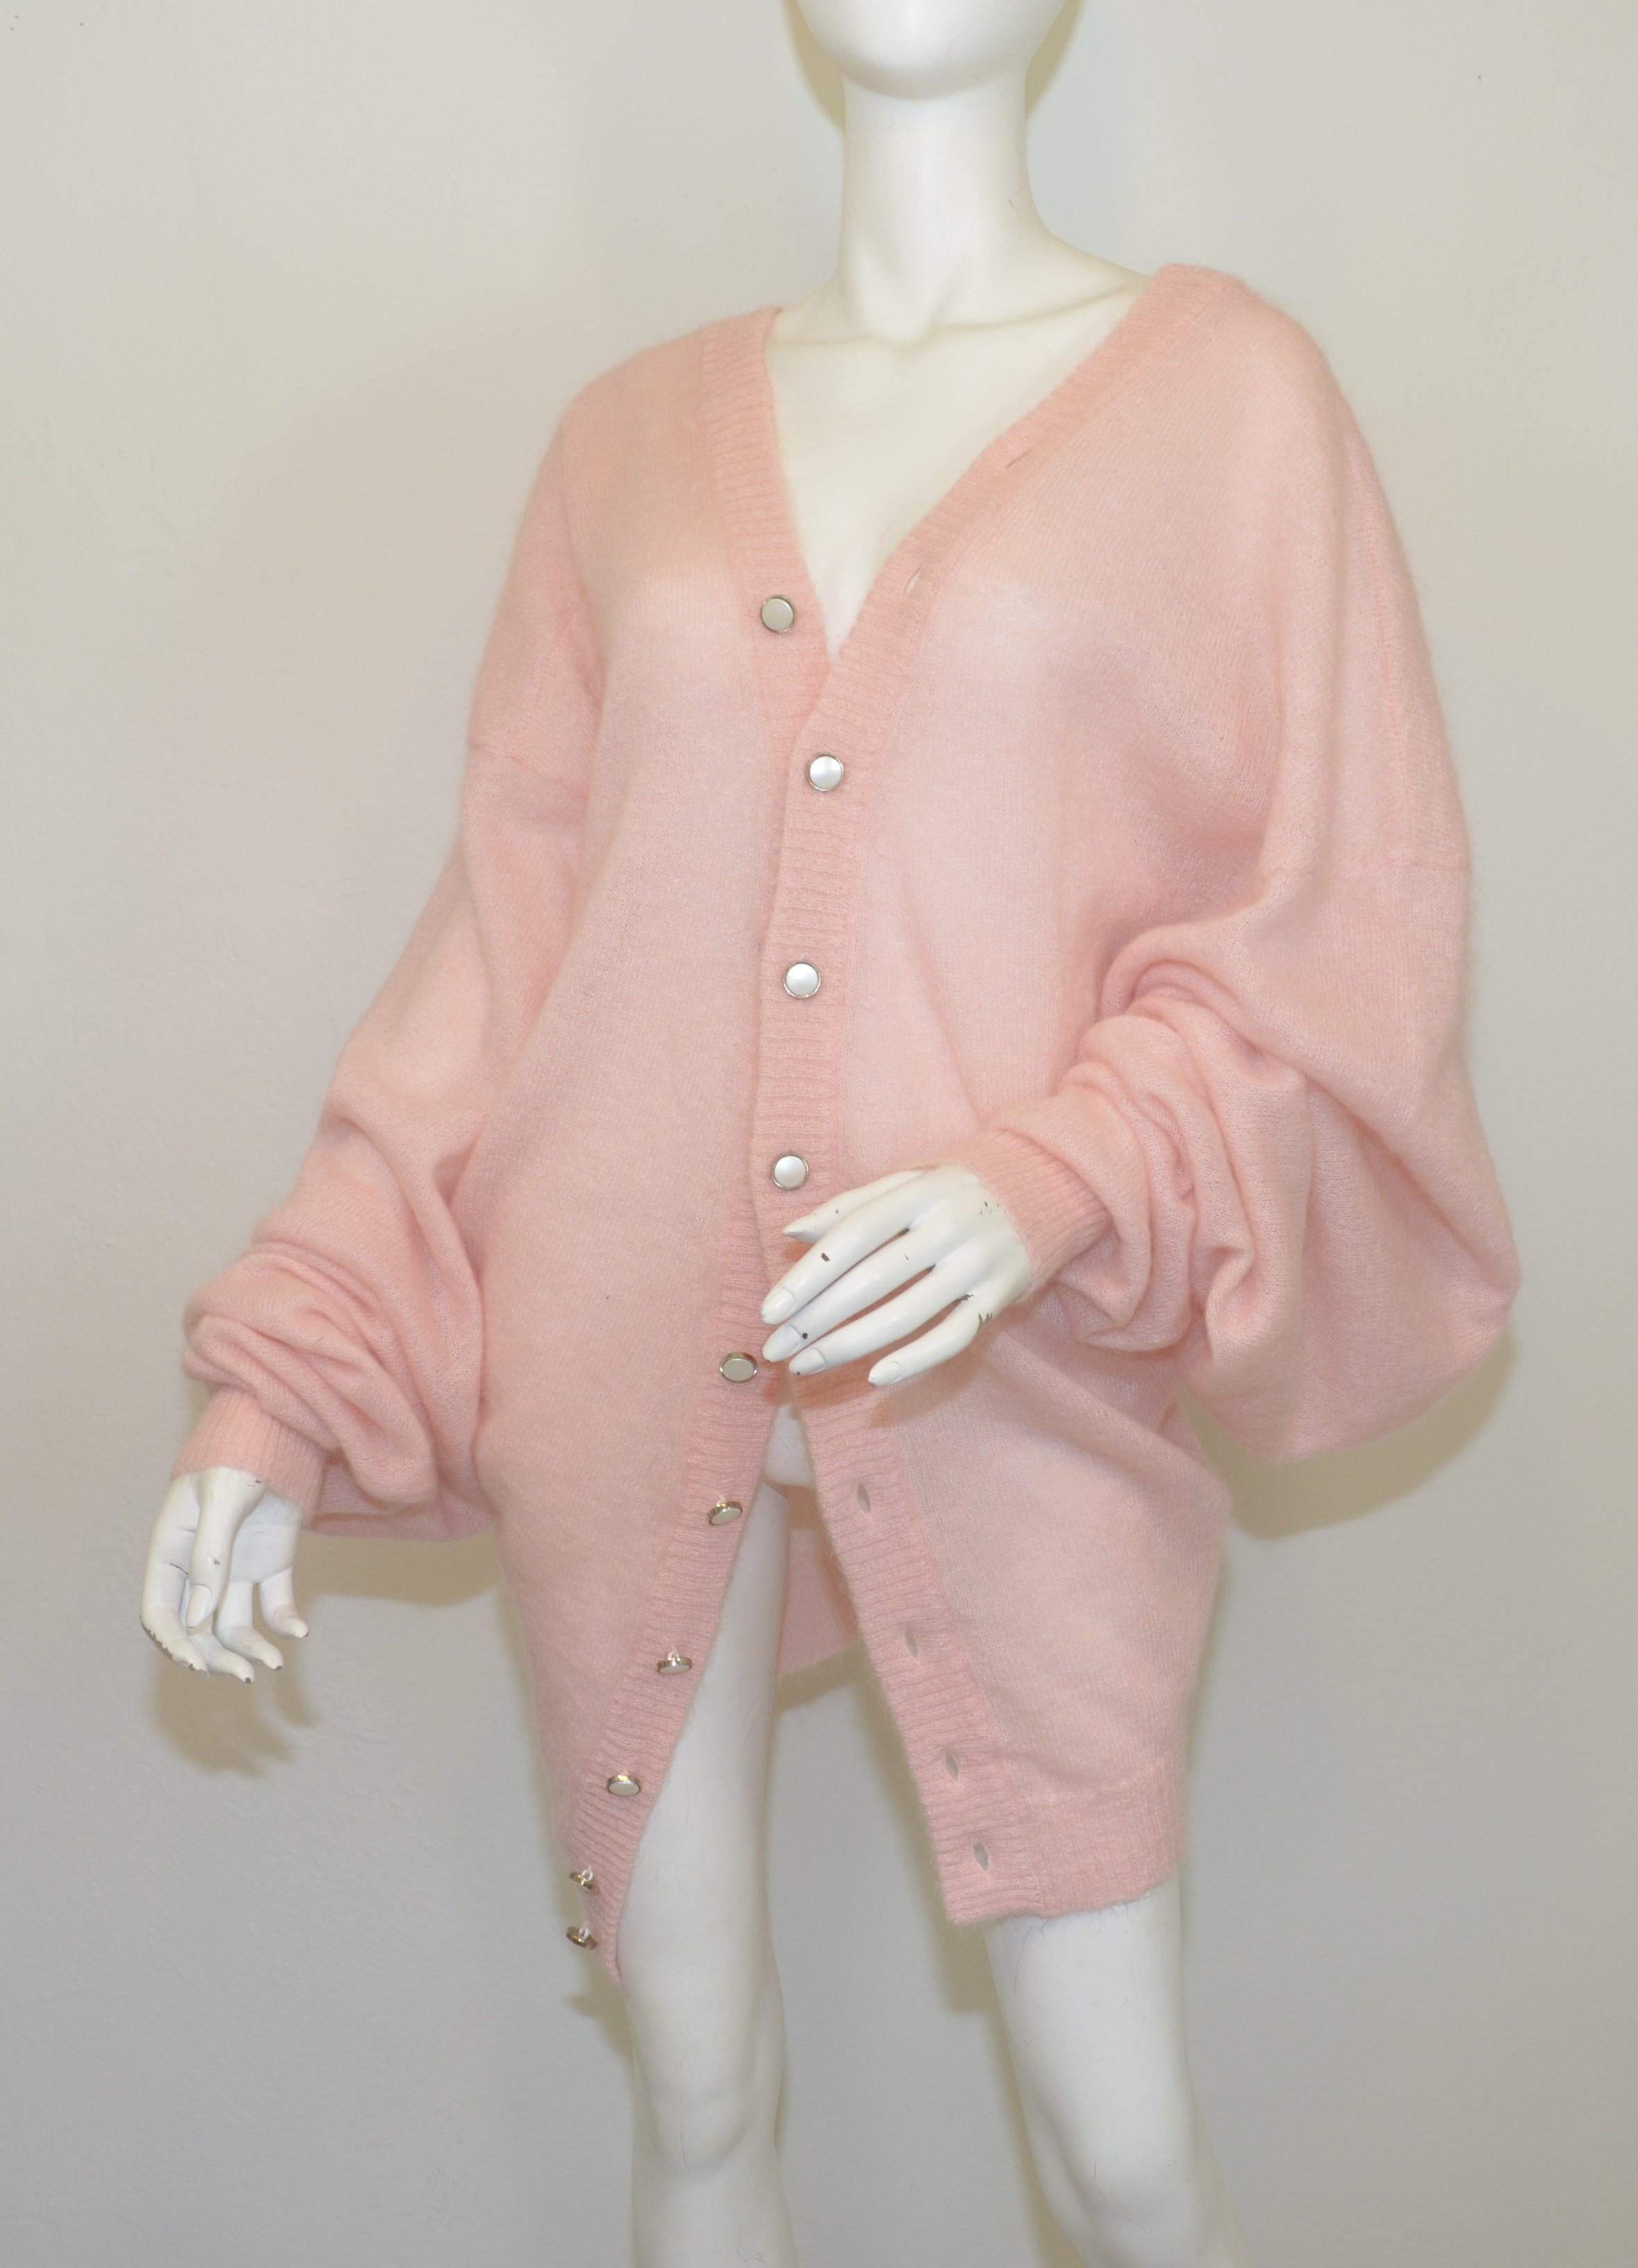 Y-Project oversized cardigan sweater in pink, composed with 66% mohair, 30% polyamide, 4% wool, with buttons all along the opening to manipulate draping. Sweater is labeled a size small.

Measurements:
Bust 46”
Sleeves 35”
Length 29”